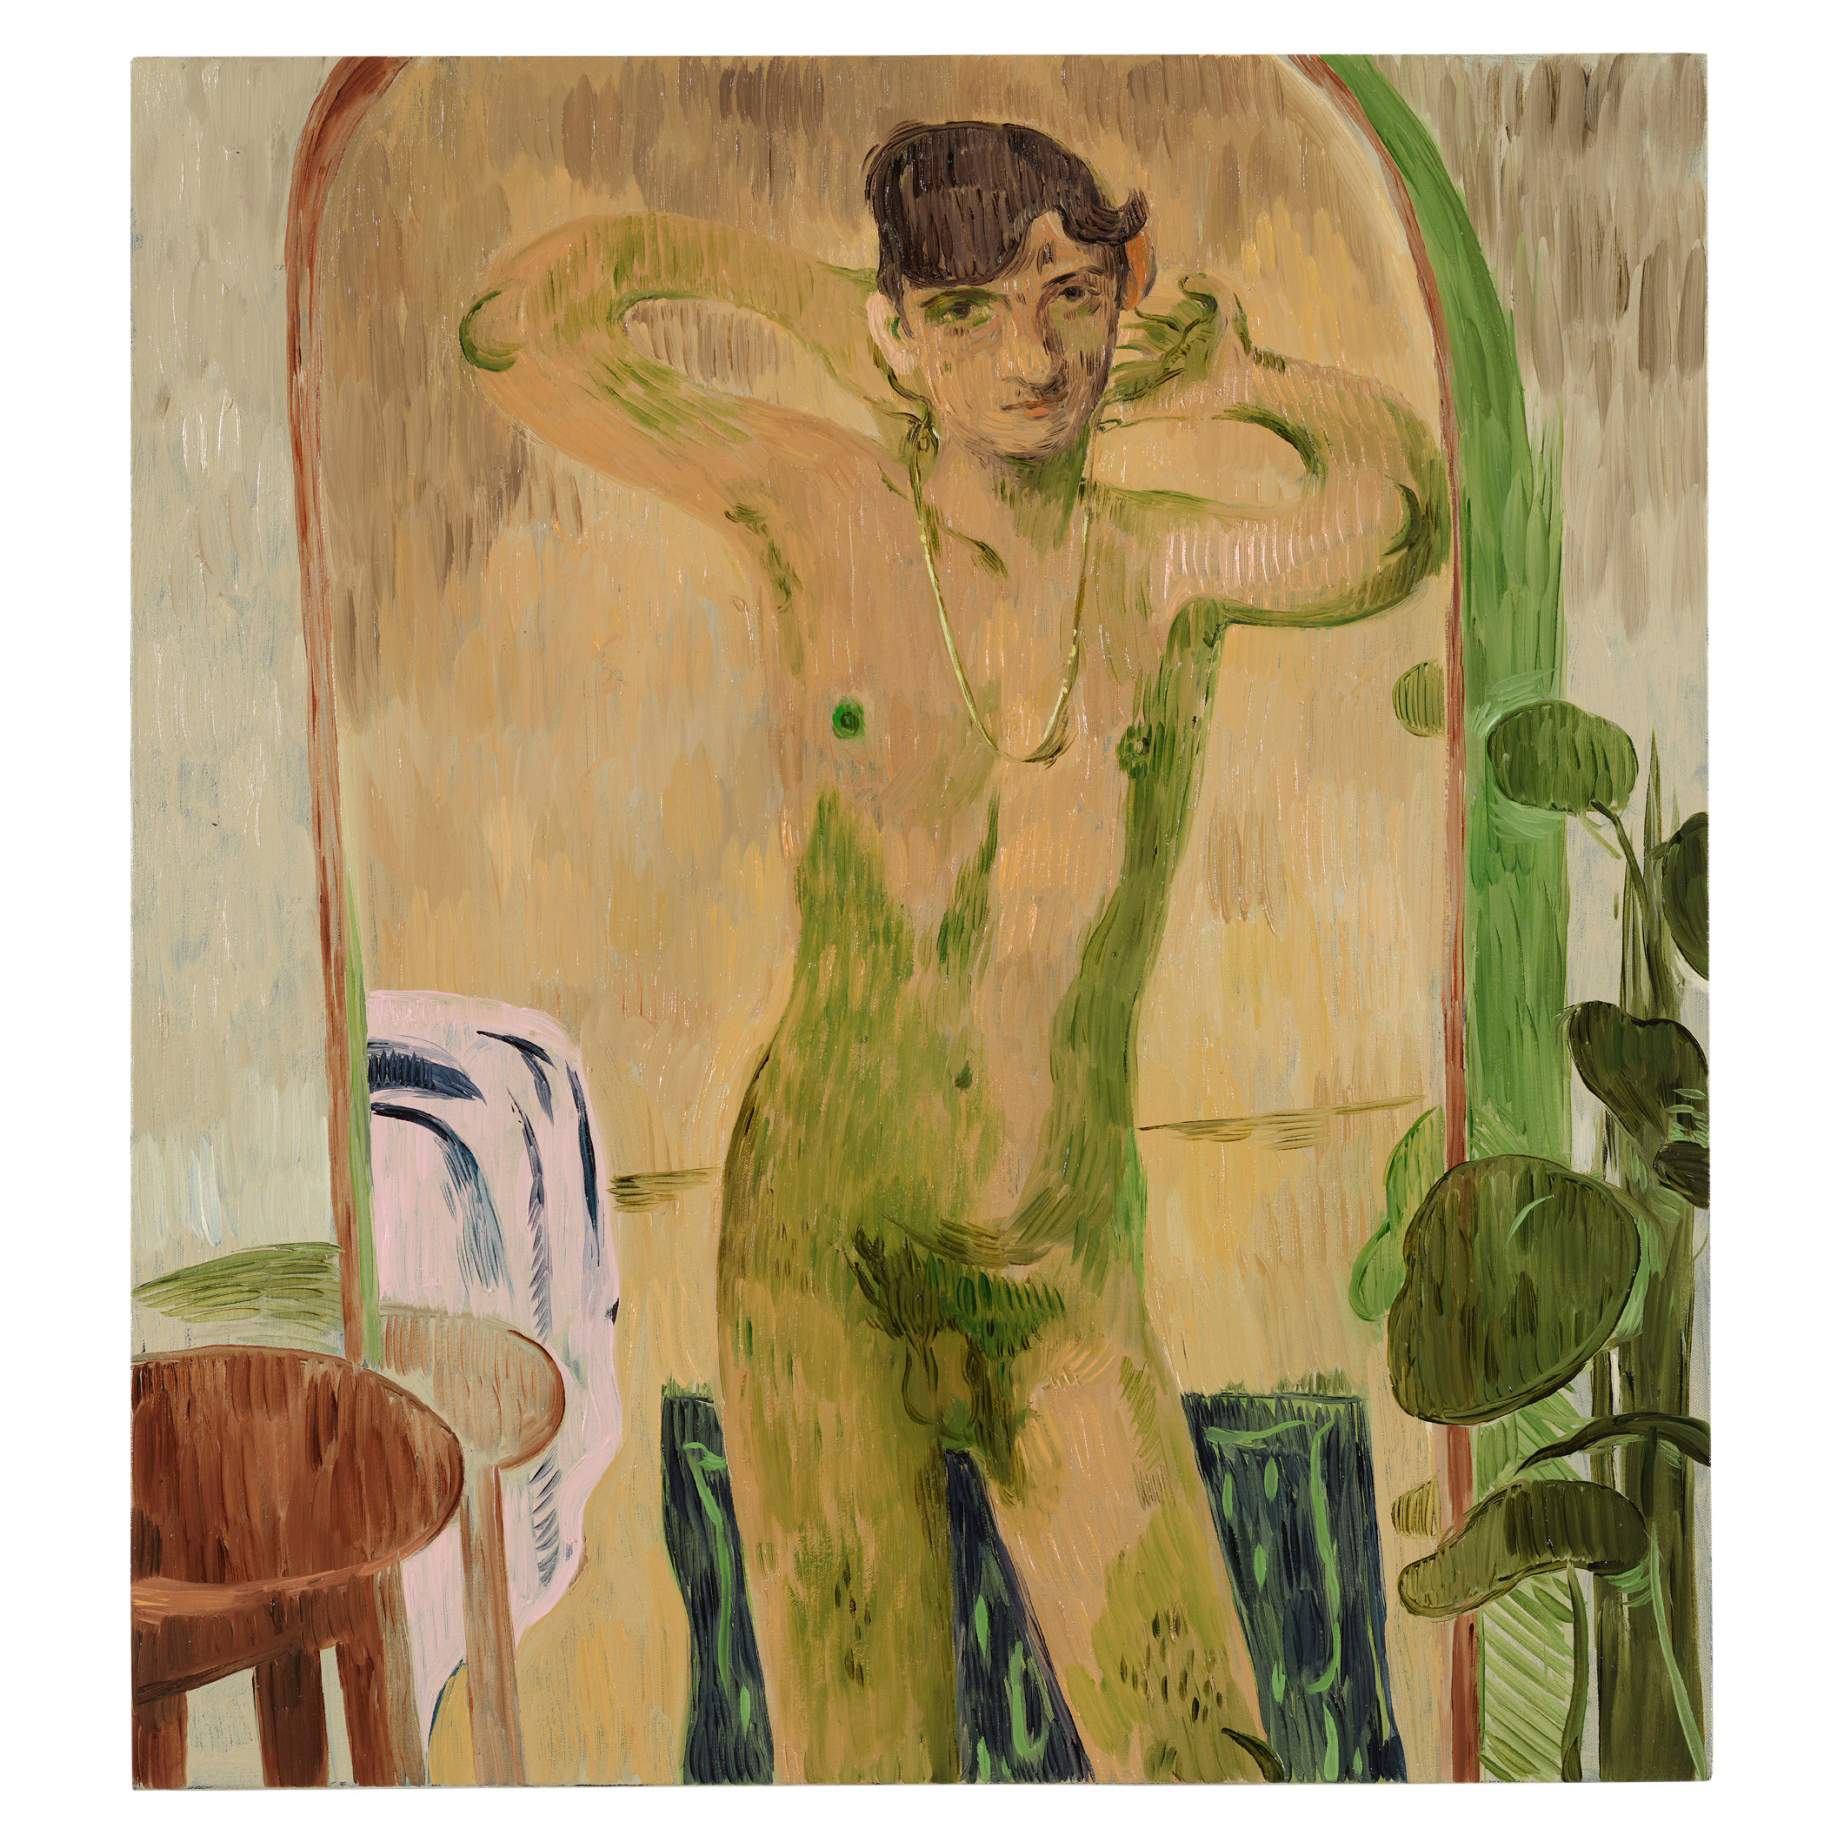 200+ Works Comprise New York Academy of Art’s “Take Home a Nude” Online Auction